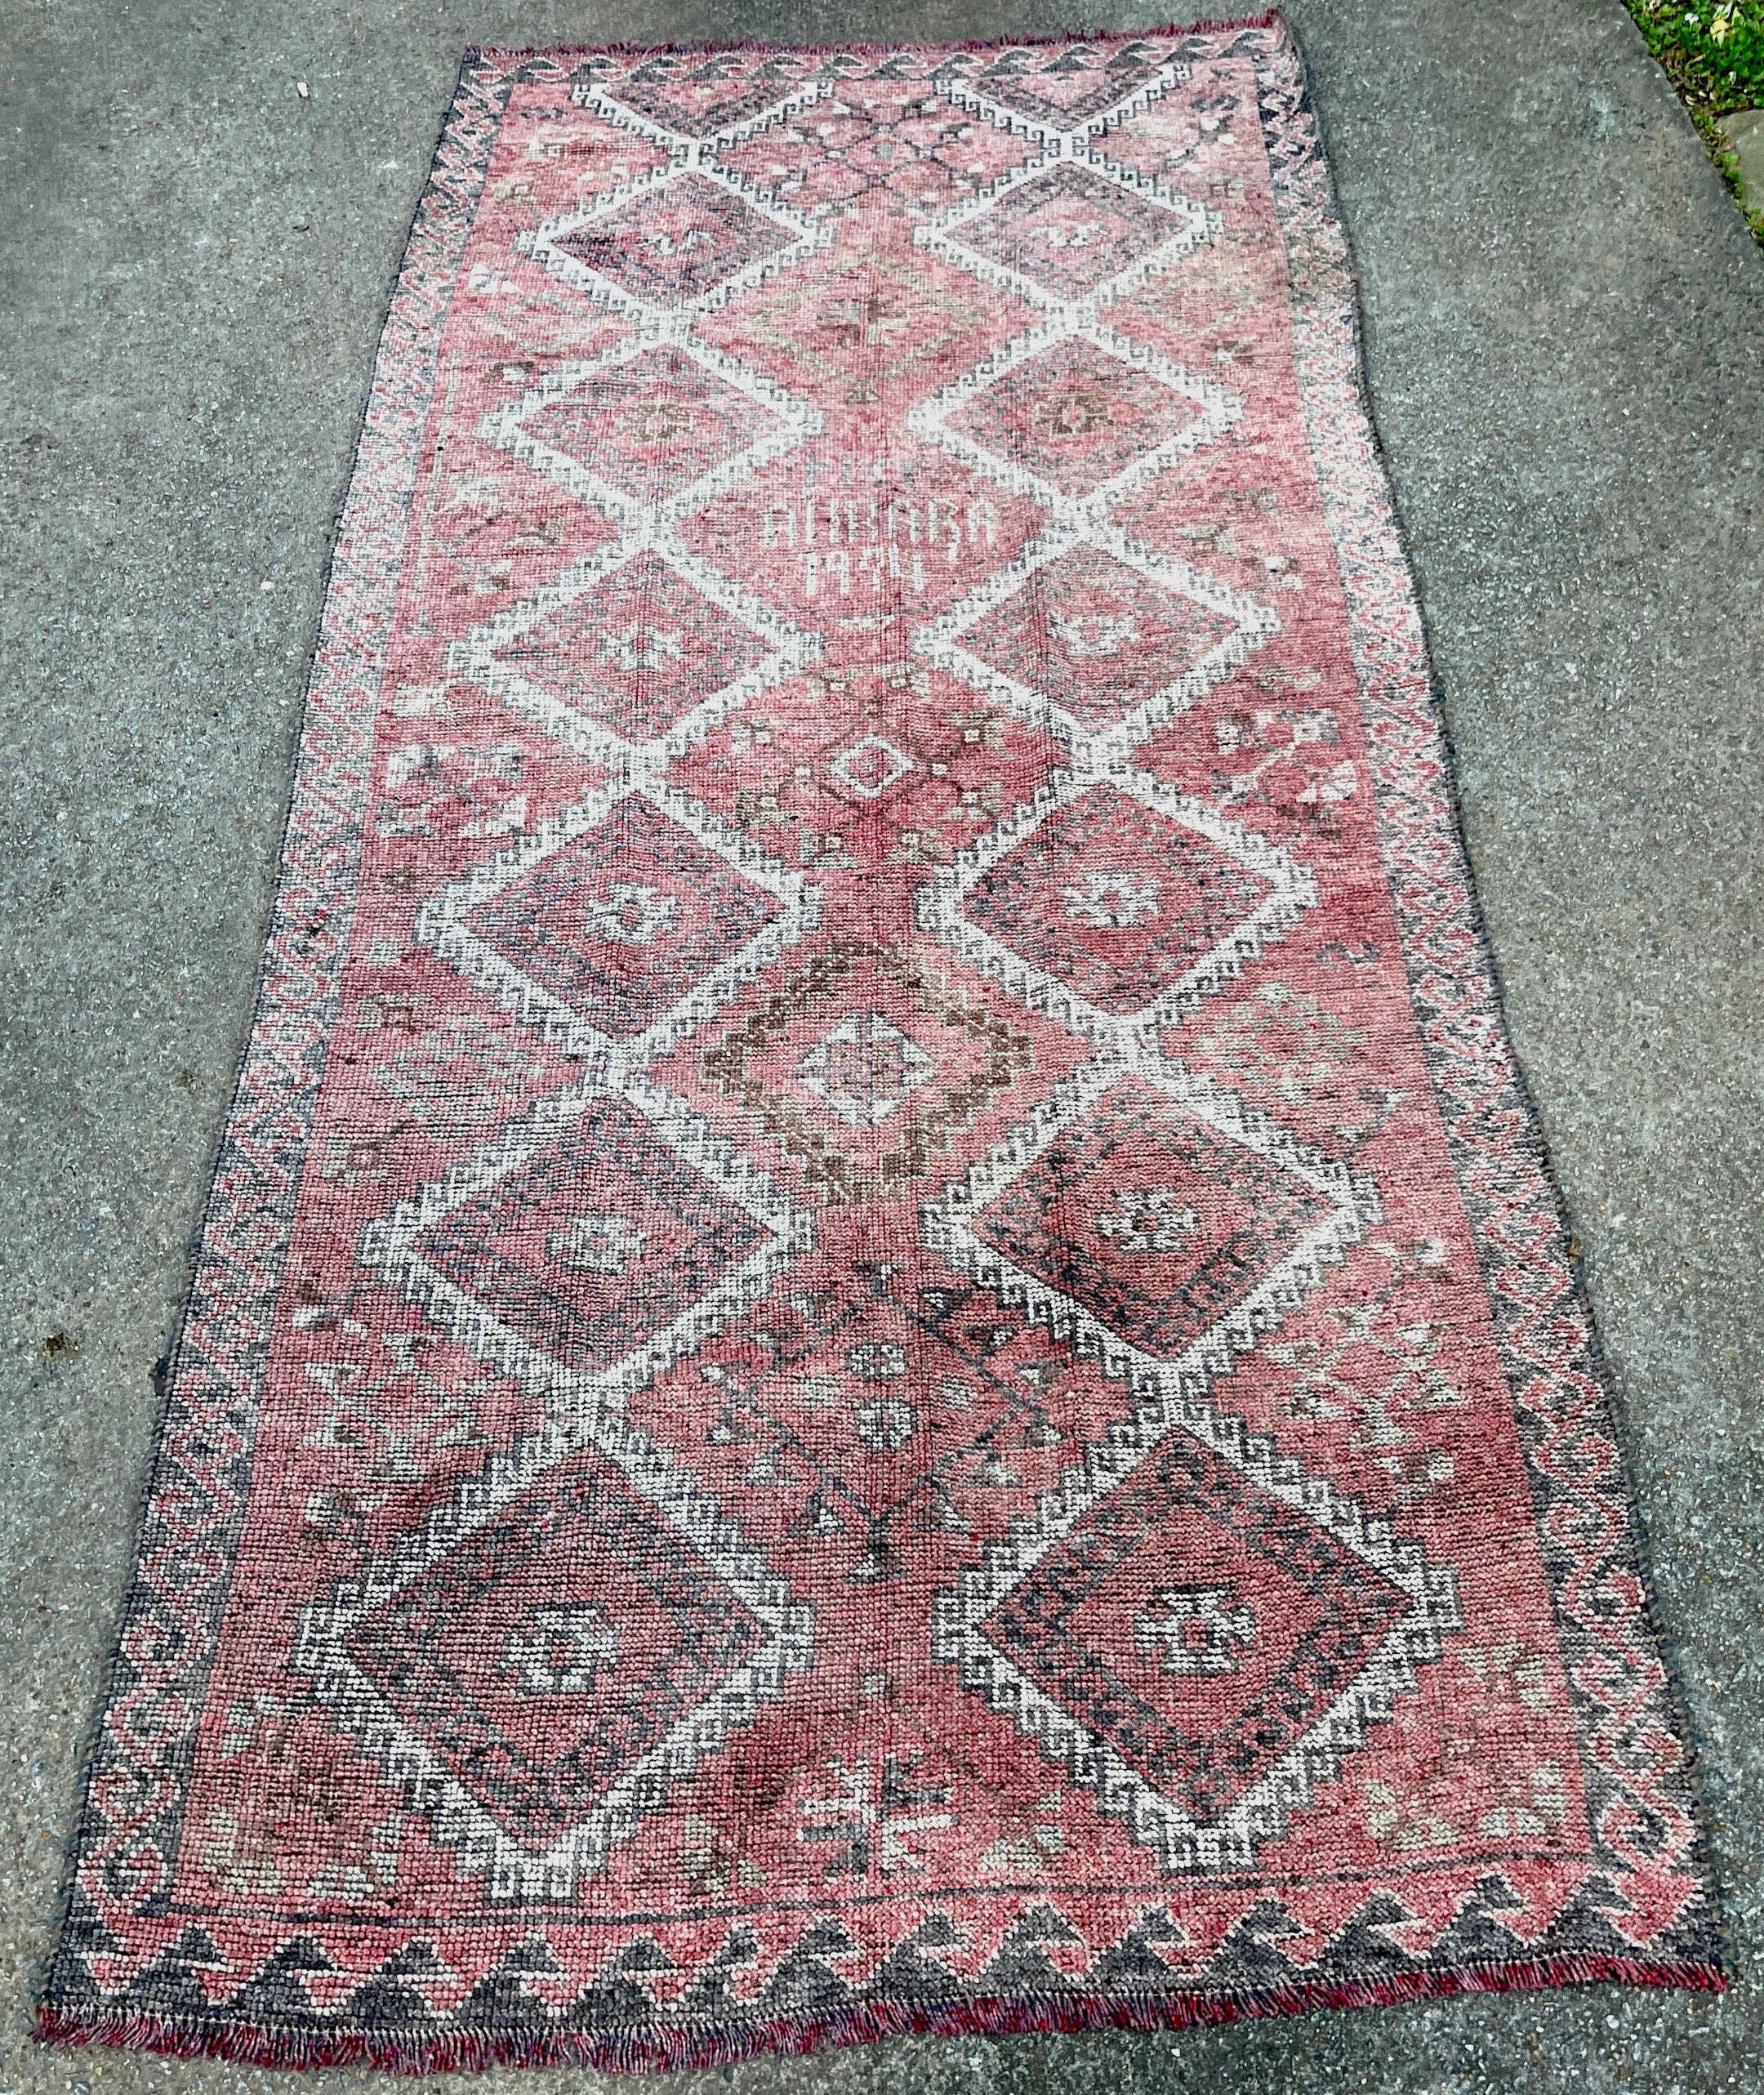 Distressed Hand-Knotted Wool Caucasian Rug (Reservable) Signed & Dated 1994
Generous in size and proportions, subtle diamond pattern, in hand-dyed red and whites, with some black additions. Can be used on either side, one side is darker.
Signed in